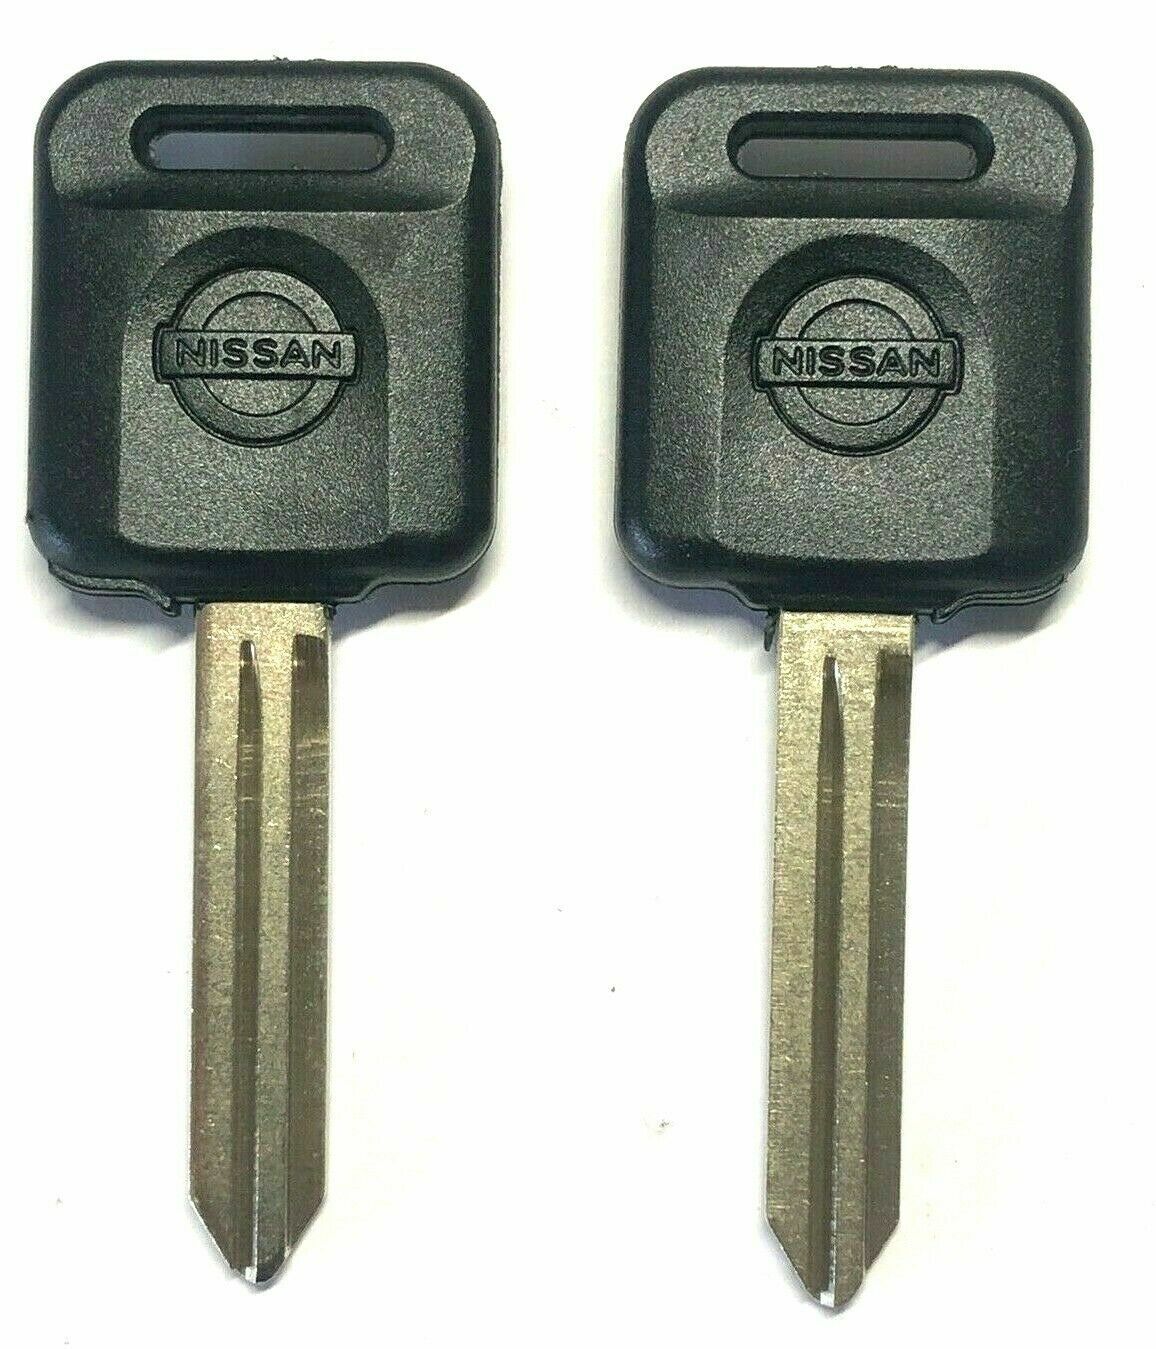 2 Ignition Key Blanks for Nissan Titan and Frontier. Transponder chip key ID 46